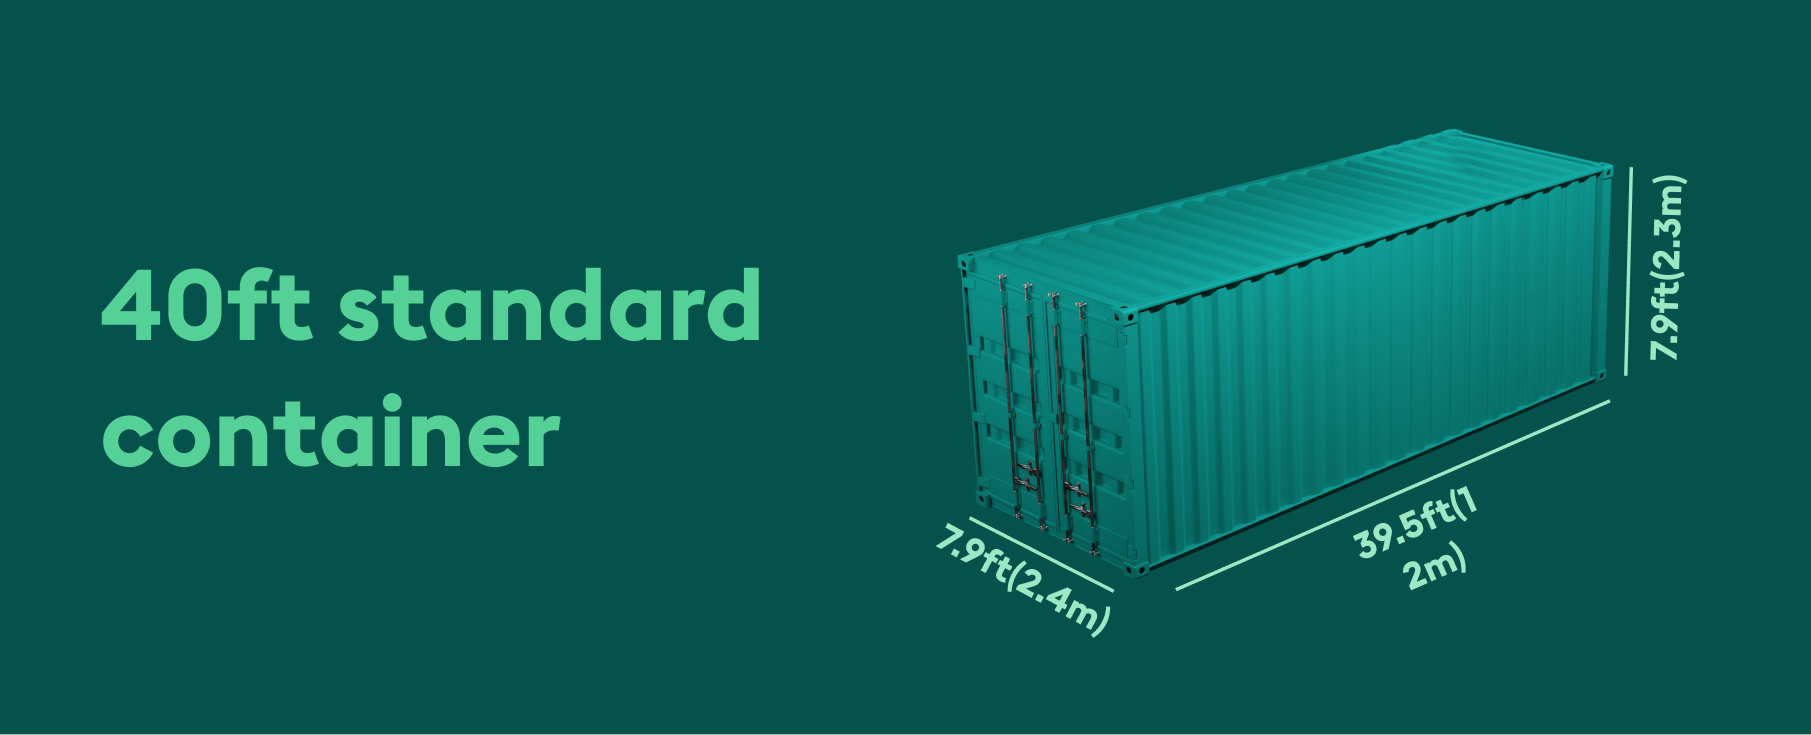 40ft standard container